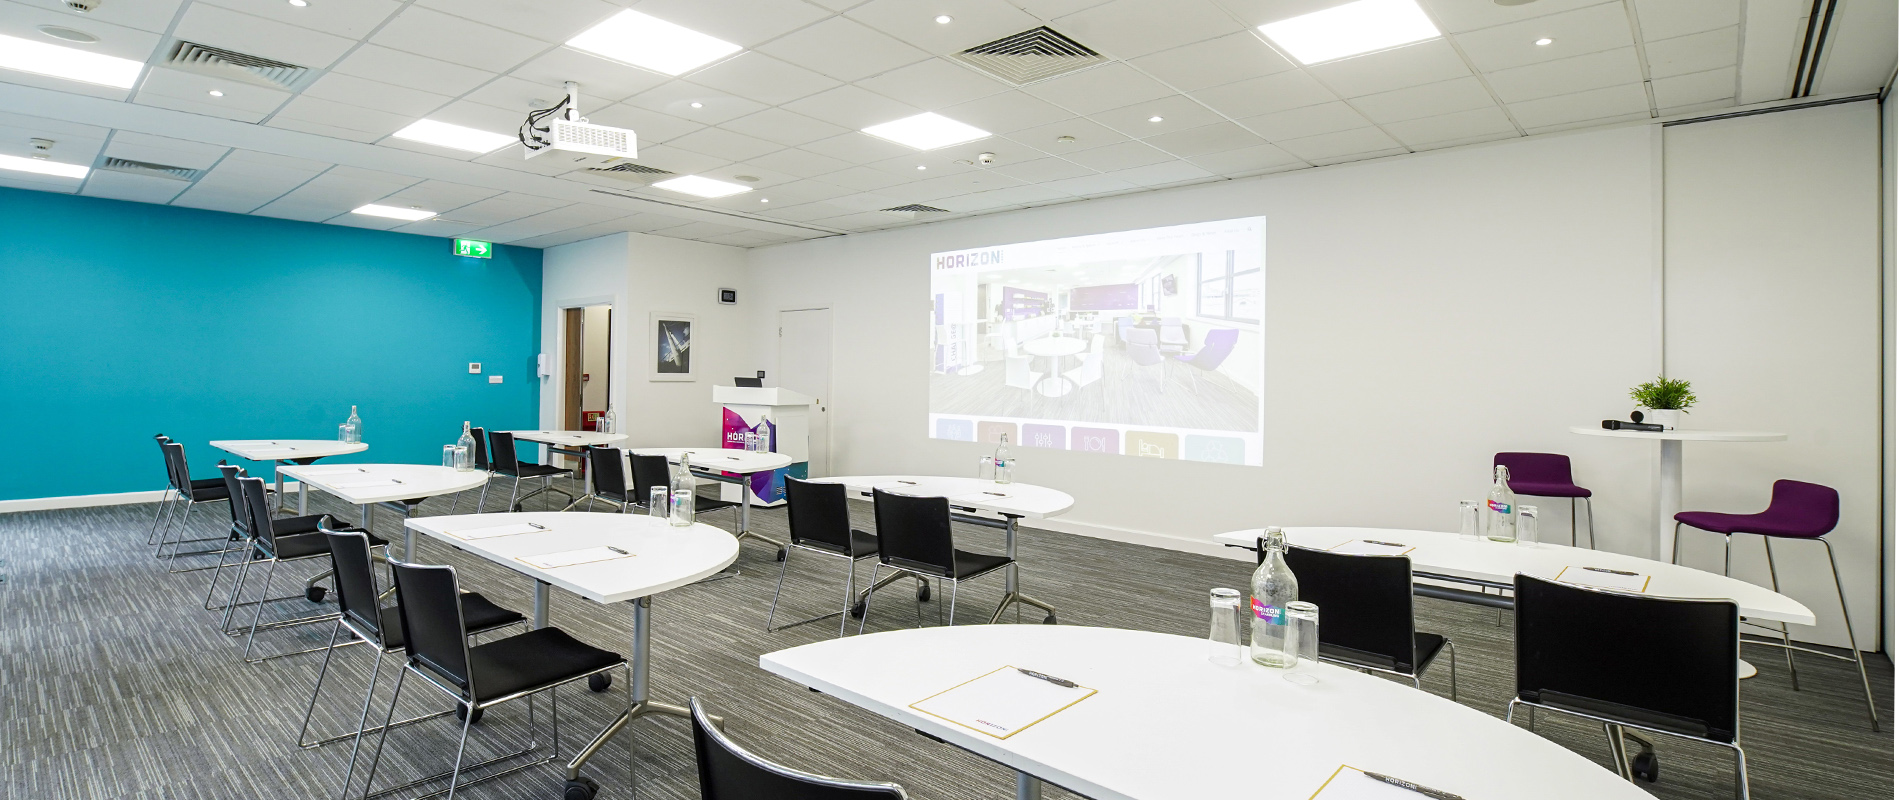 Create 2 | Horizon Leeds | meetings, conferences and events in central Leeds